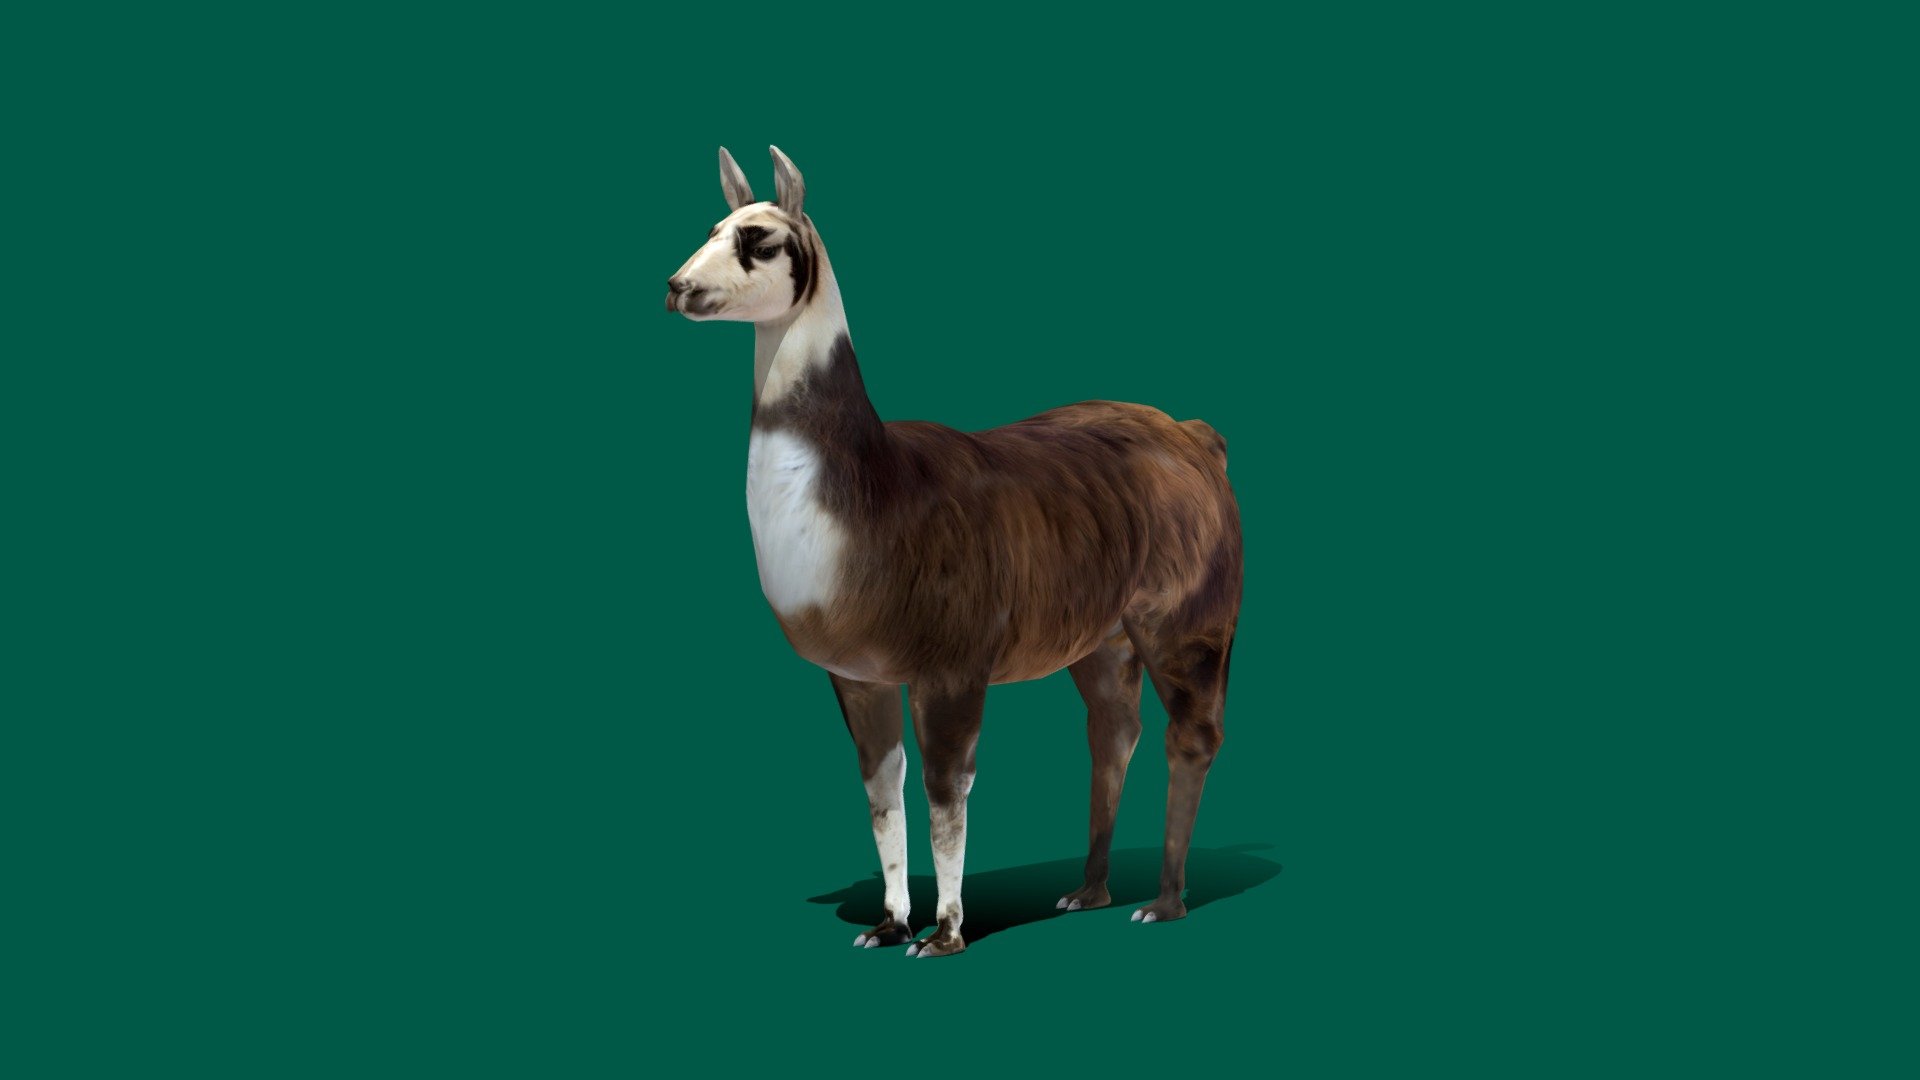 Llama Animal
Lowpoly Gameready 
5 animations
4K PBR Textures Materials
Ref image

The llama is a domesticated South American camelid, widely used as a meat and pack animal by Andean cultures since the Pre-Columbian era. Llamas are social animals and live with others as a herd. Their wool is soft and contains only a small amount of lanolin. Llamas can learn simple tasks after a few repetitions. Wikipedia
Gestation period: 11 months
Eats: Grasses
Mass: 130 – 200 kg (Adult)
Scientific name: Lama glama
Family: Camelidae
Kingdom: Animalia
Order: Artiodactyla - Llama (Lowpoly) - Buy Royalty Free 3D model by Nyilonelycompany 3d model